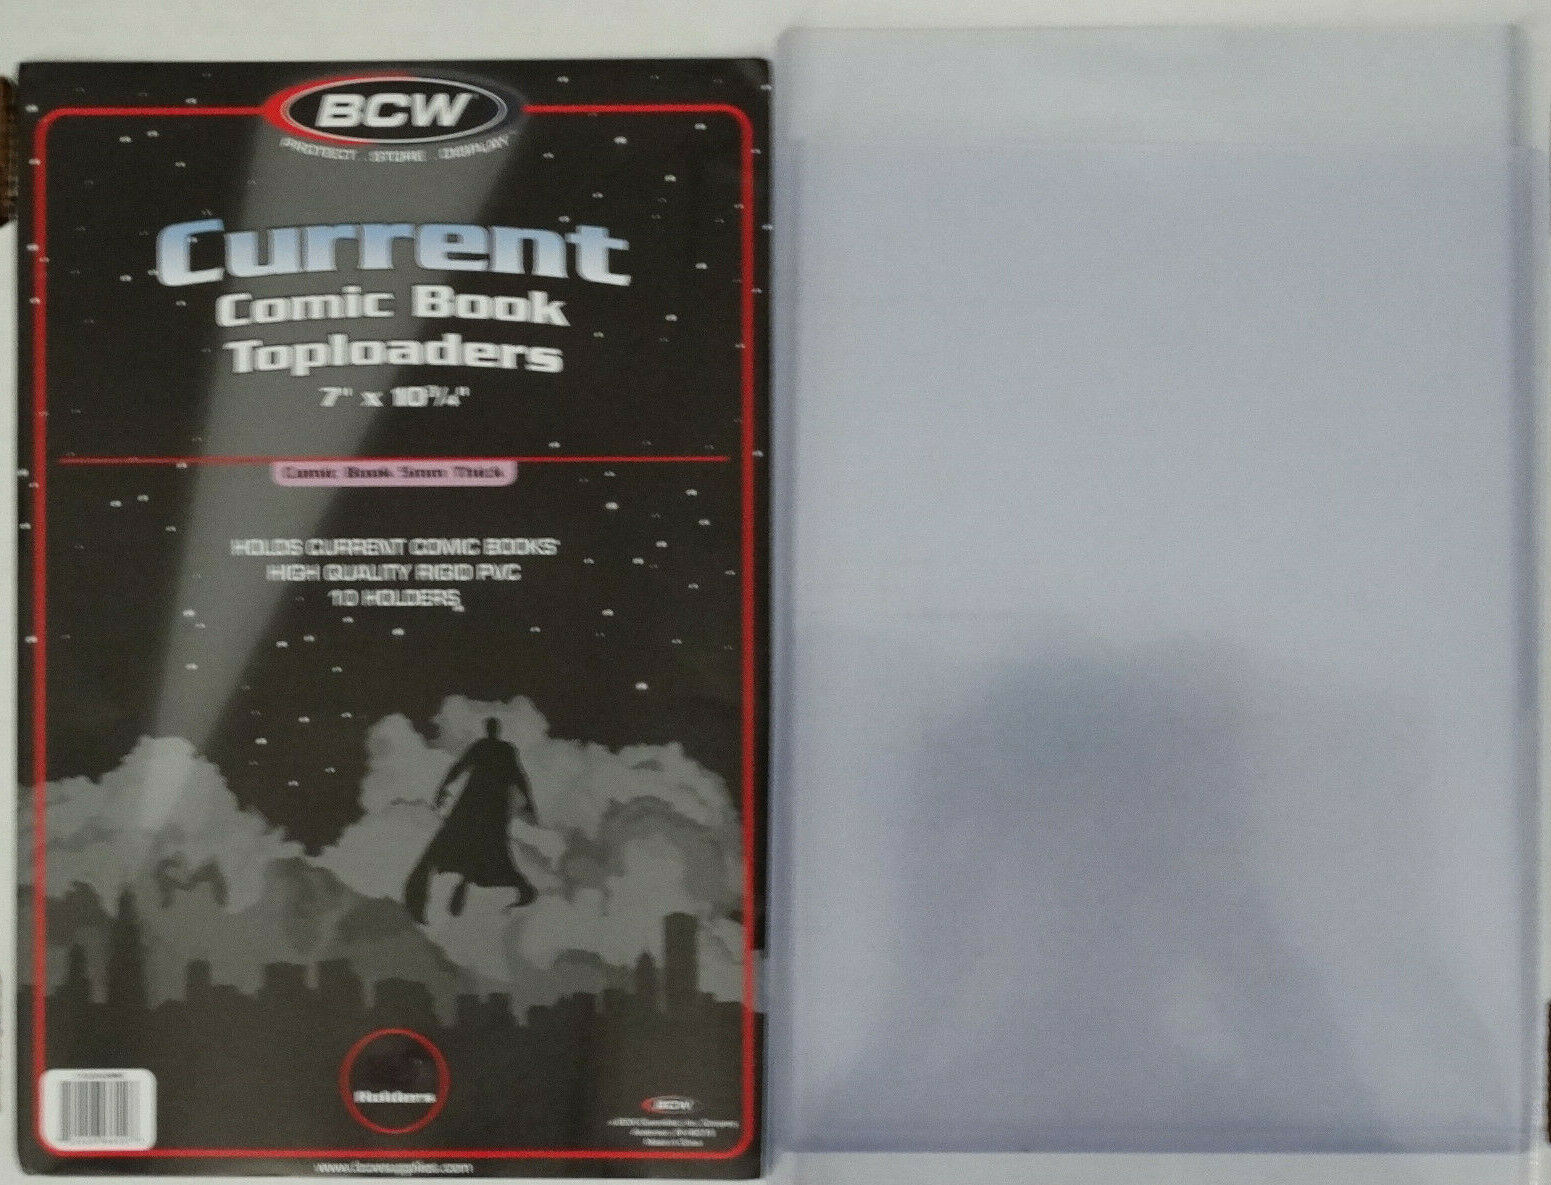 2 Loose BCW Current Comic Book Topload Holder Toploaders New